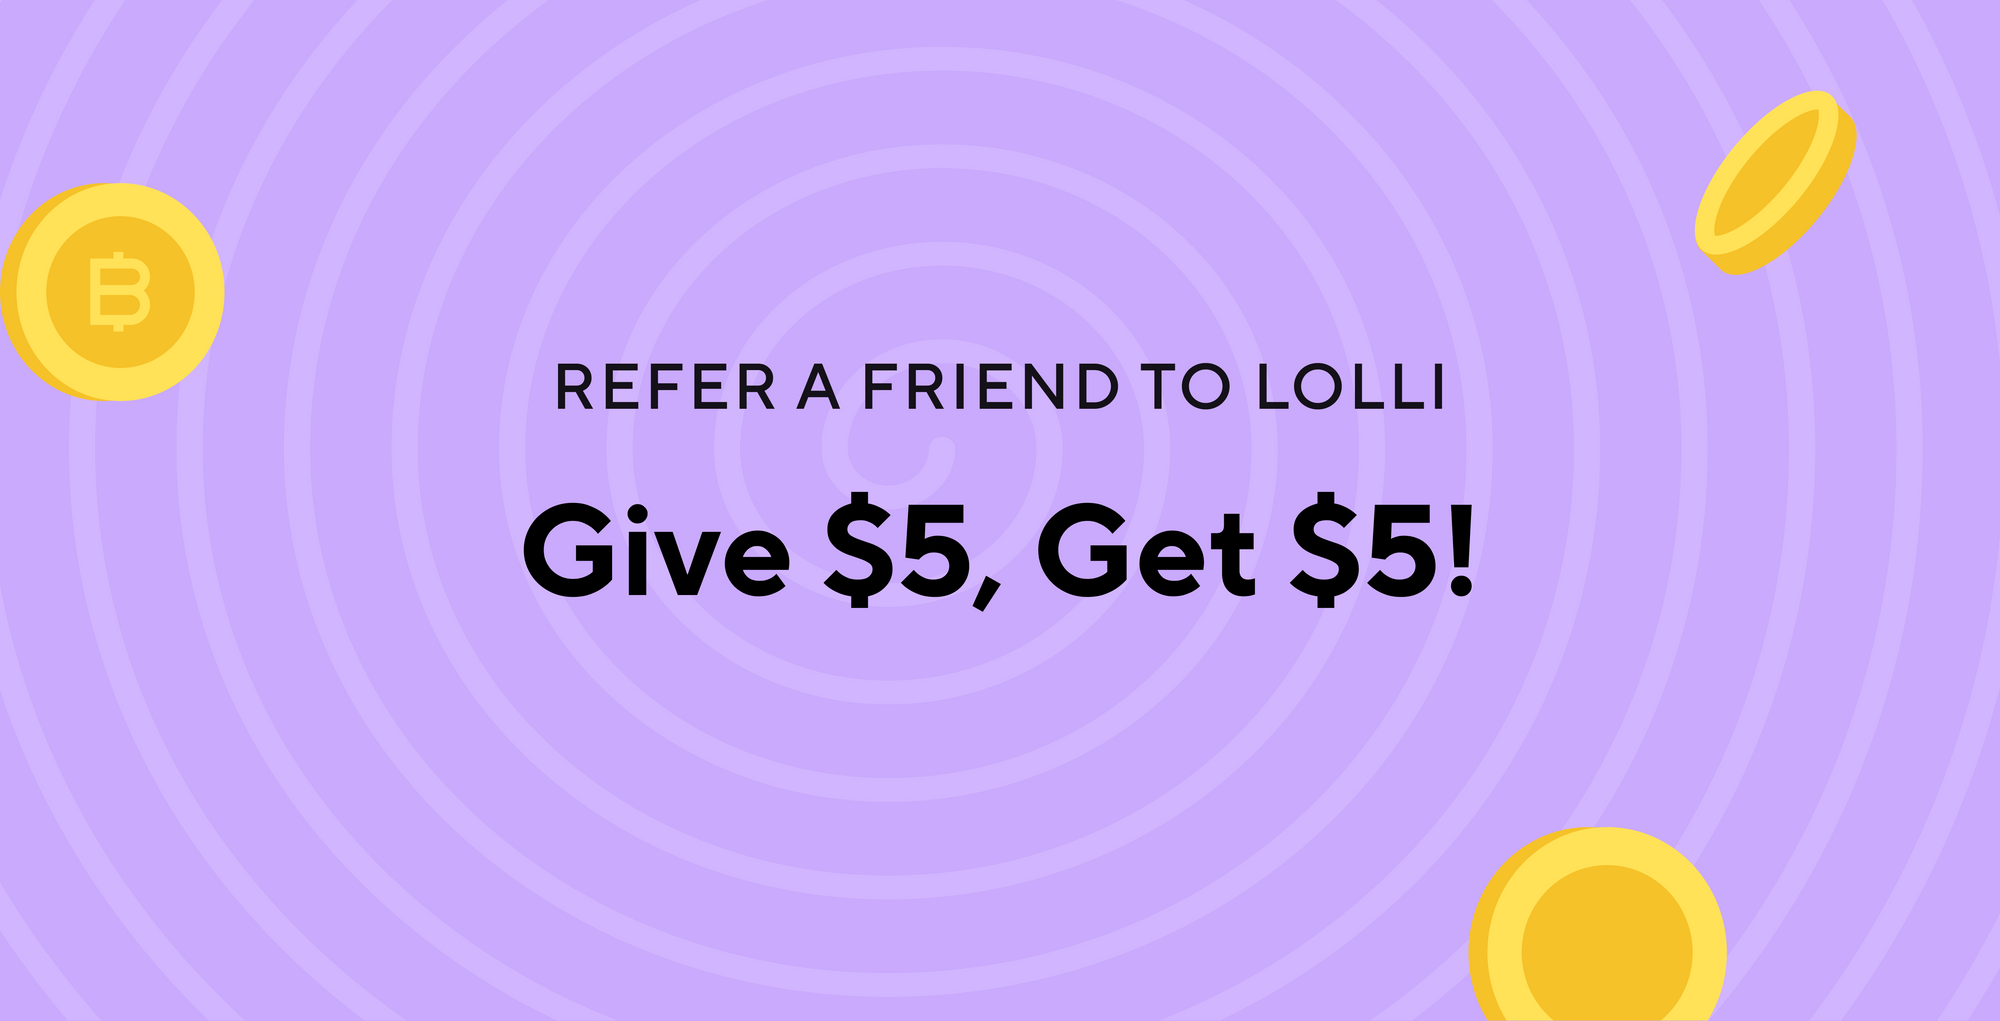 Earn $5 in Bitcoin When You Refer a Friend to Lolli